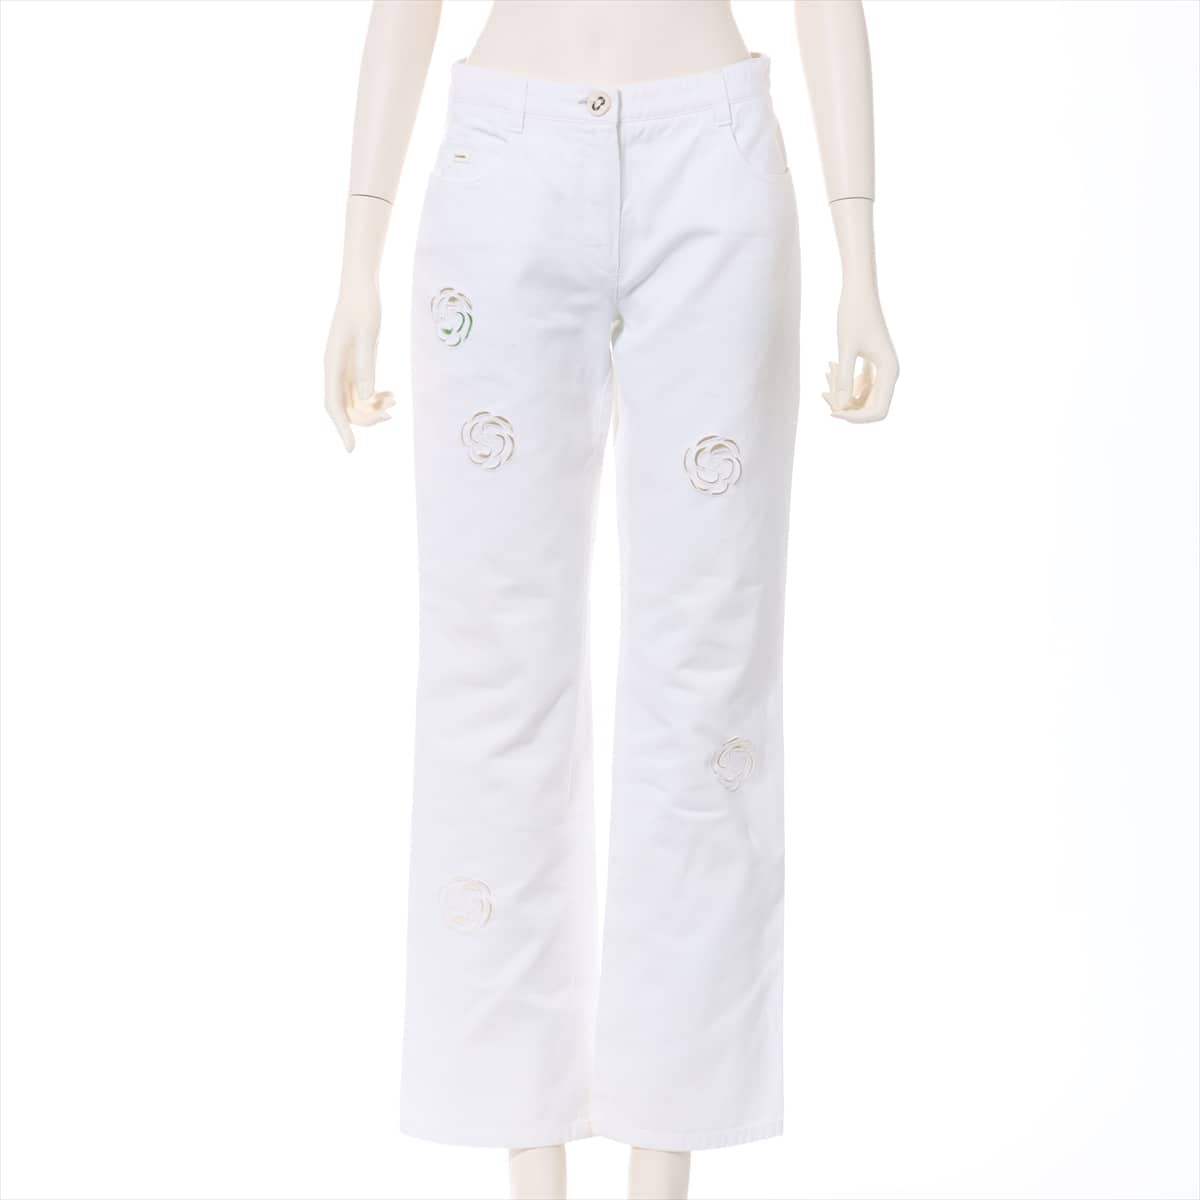 Chanel Camelia Cotton Denim pants 40 Ladies' White  The printing on the model year tag has disappeared, and there are stains on the crotch etc.